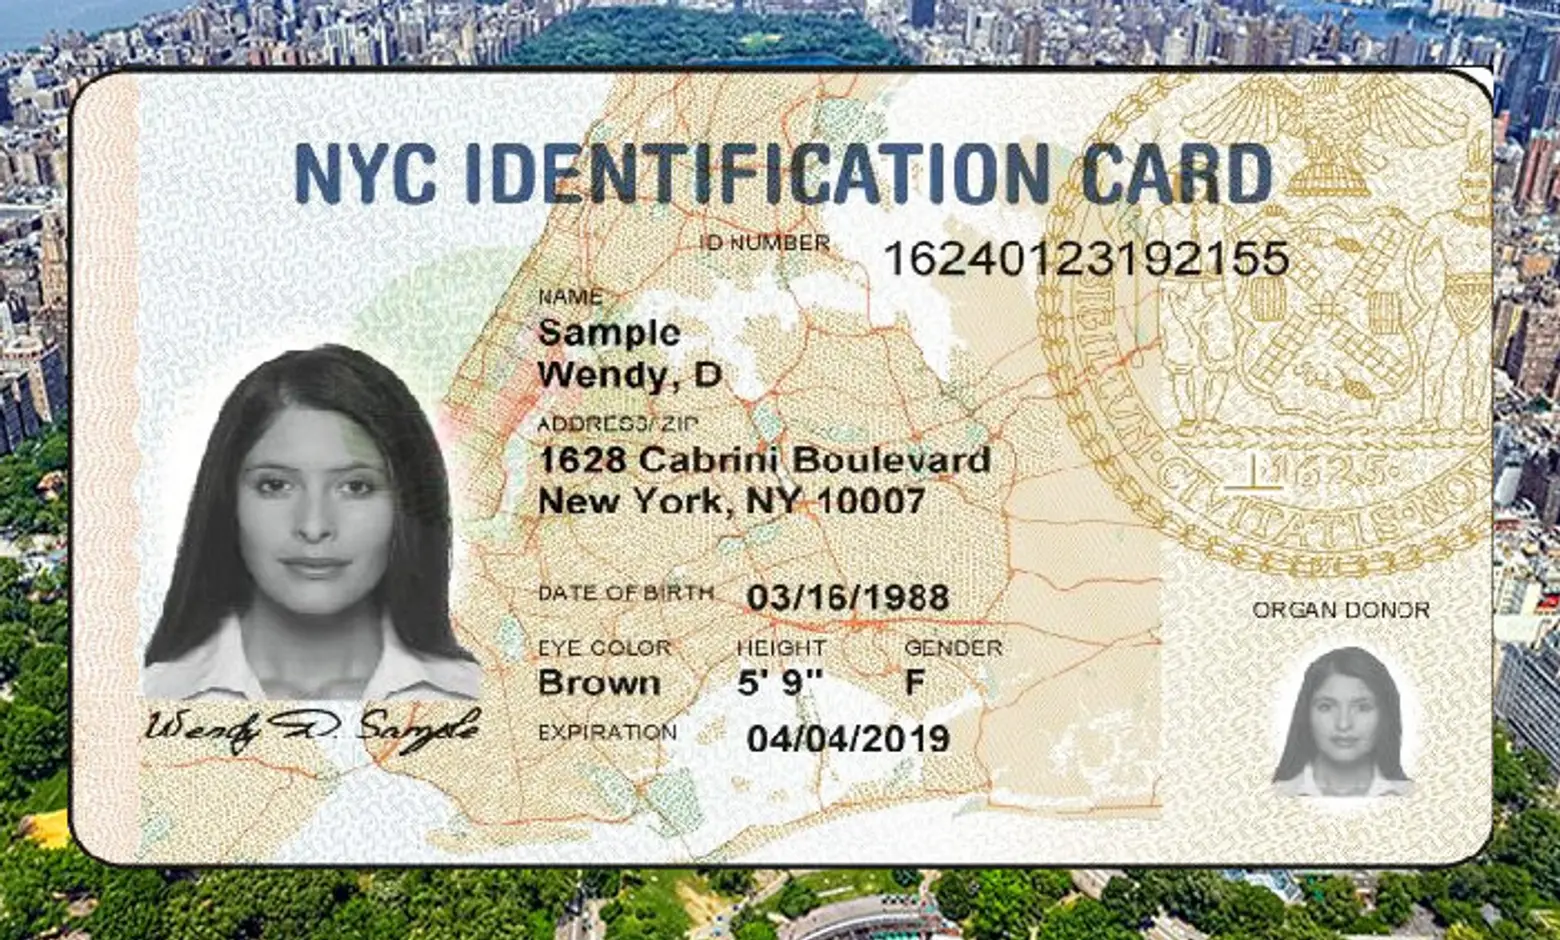 NYC Municipal ID Card Holders Will Get Even More Free Stuff in 2016